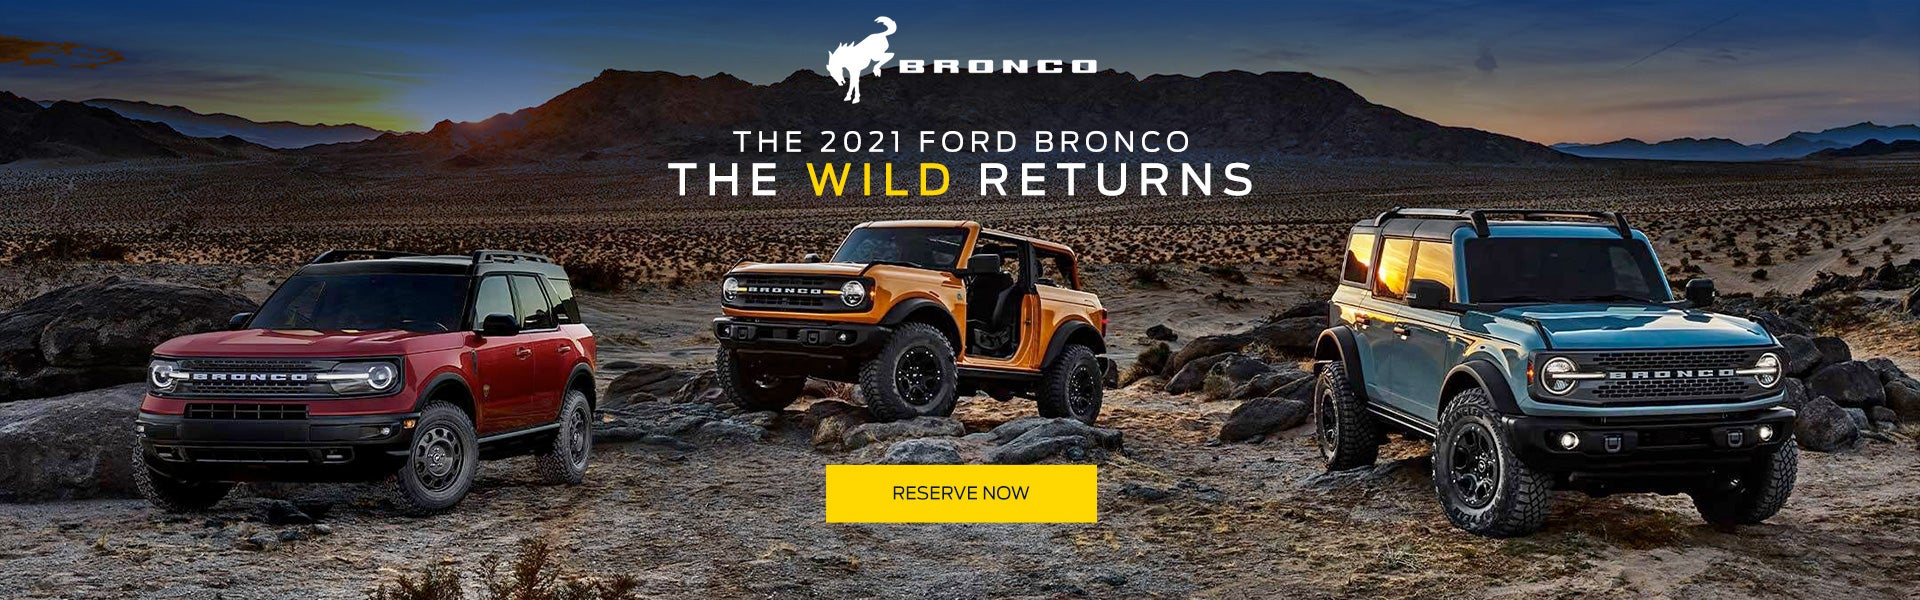 Ford Bronco Reservations